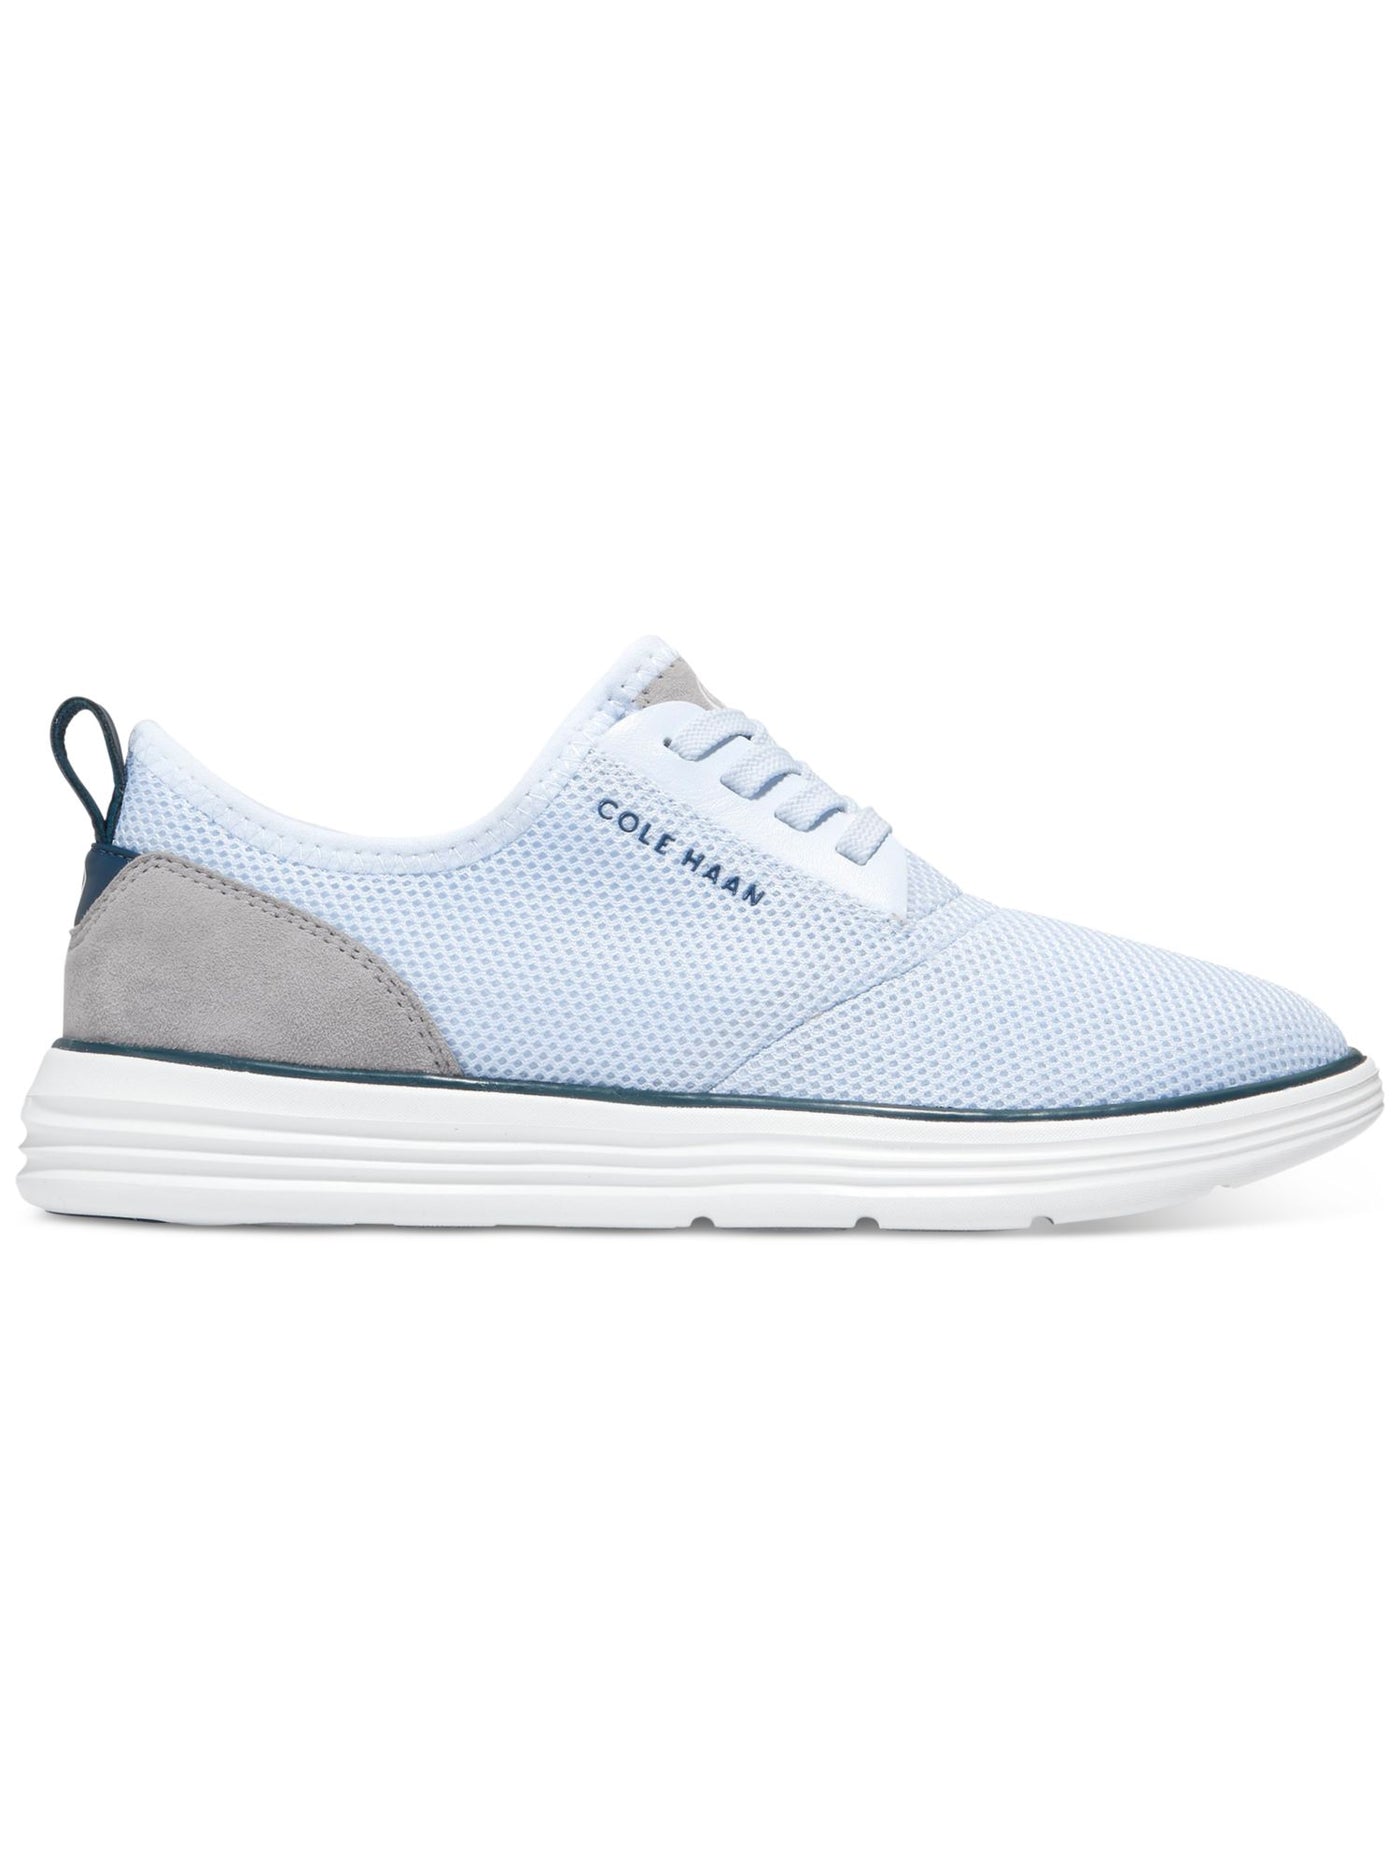 COLE HAAN Womens Light Blue Mixed Media Back Pull-Tab Cushioned Breathable Grand Sport Round Toe Wedge Lace-Up Sneakers Shoes 9.5 B